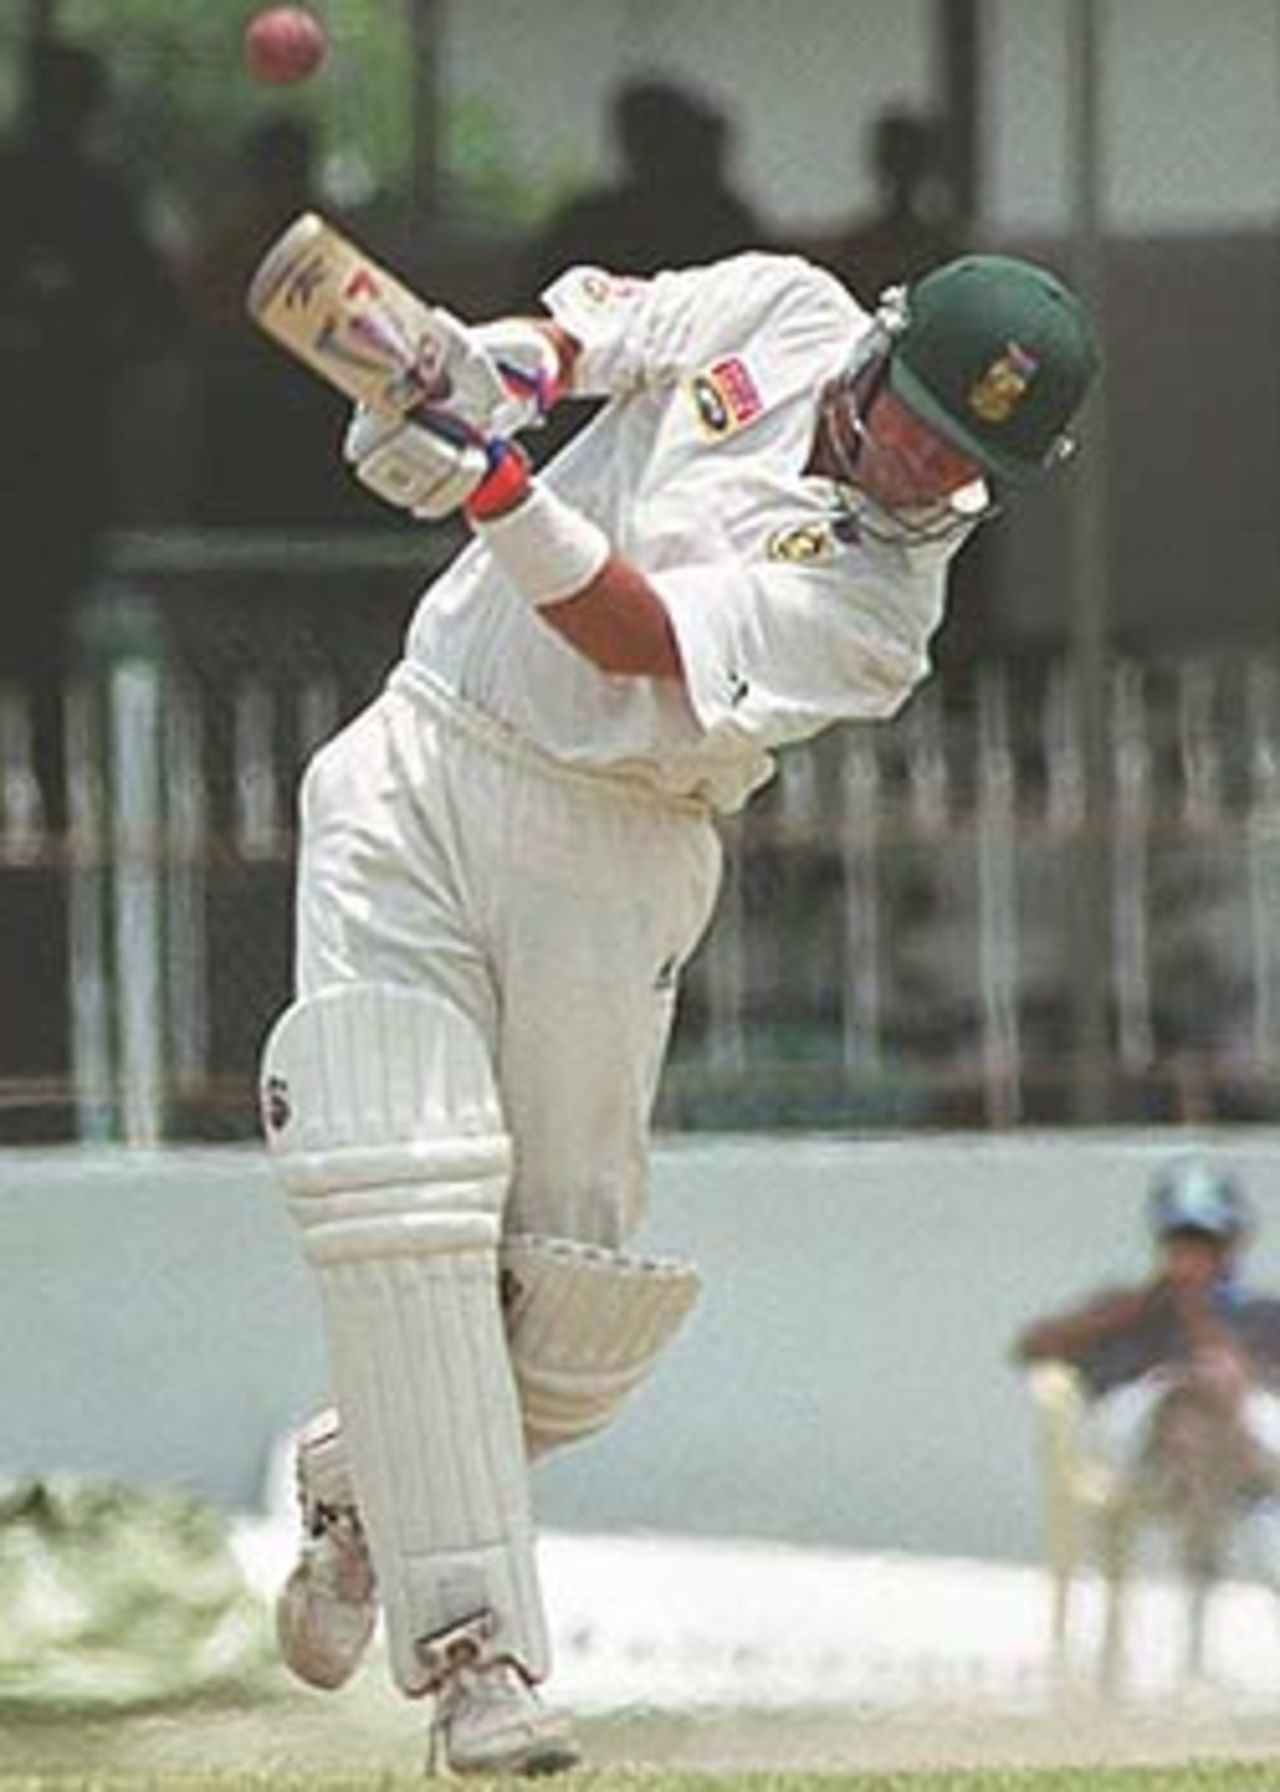 Nicky Boje lofts the ball over the infield. South Africa in Sri Lanka 2000/01, 3rd Test, Sri Lanka v South Africa, Sinhalese Sports Club Ground, Colombo,06-10 August 2000 (Day 5).